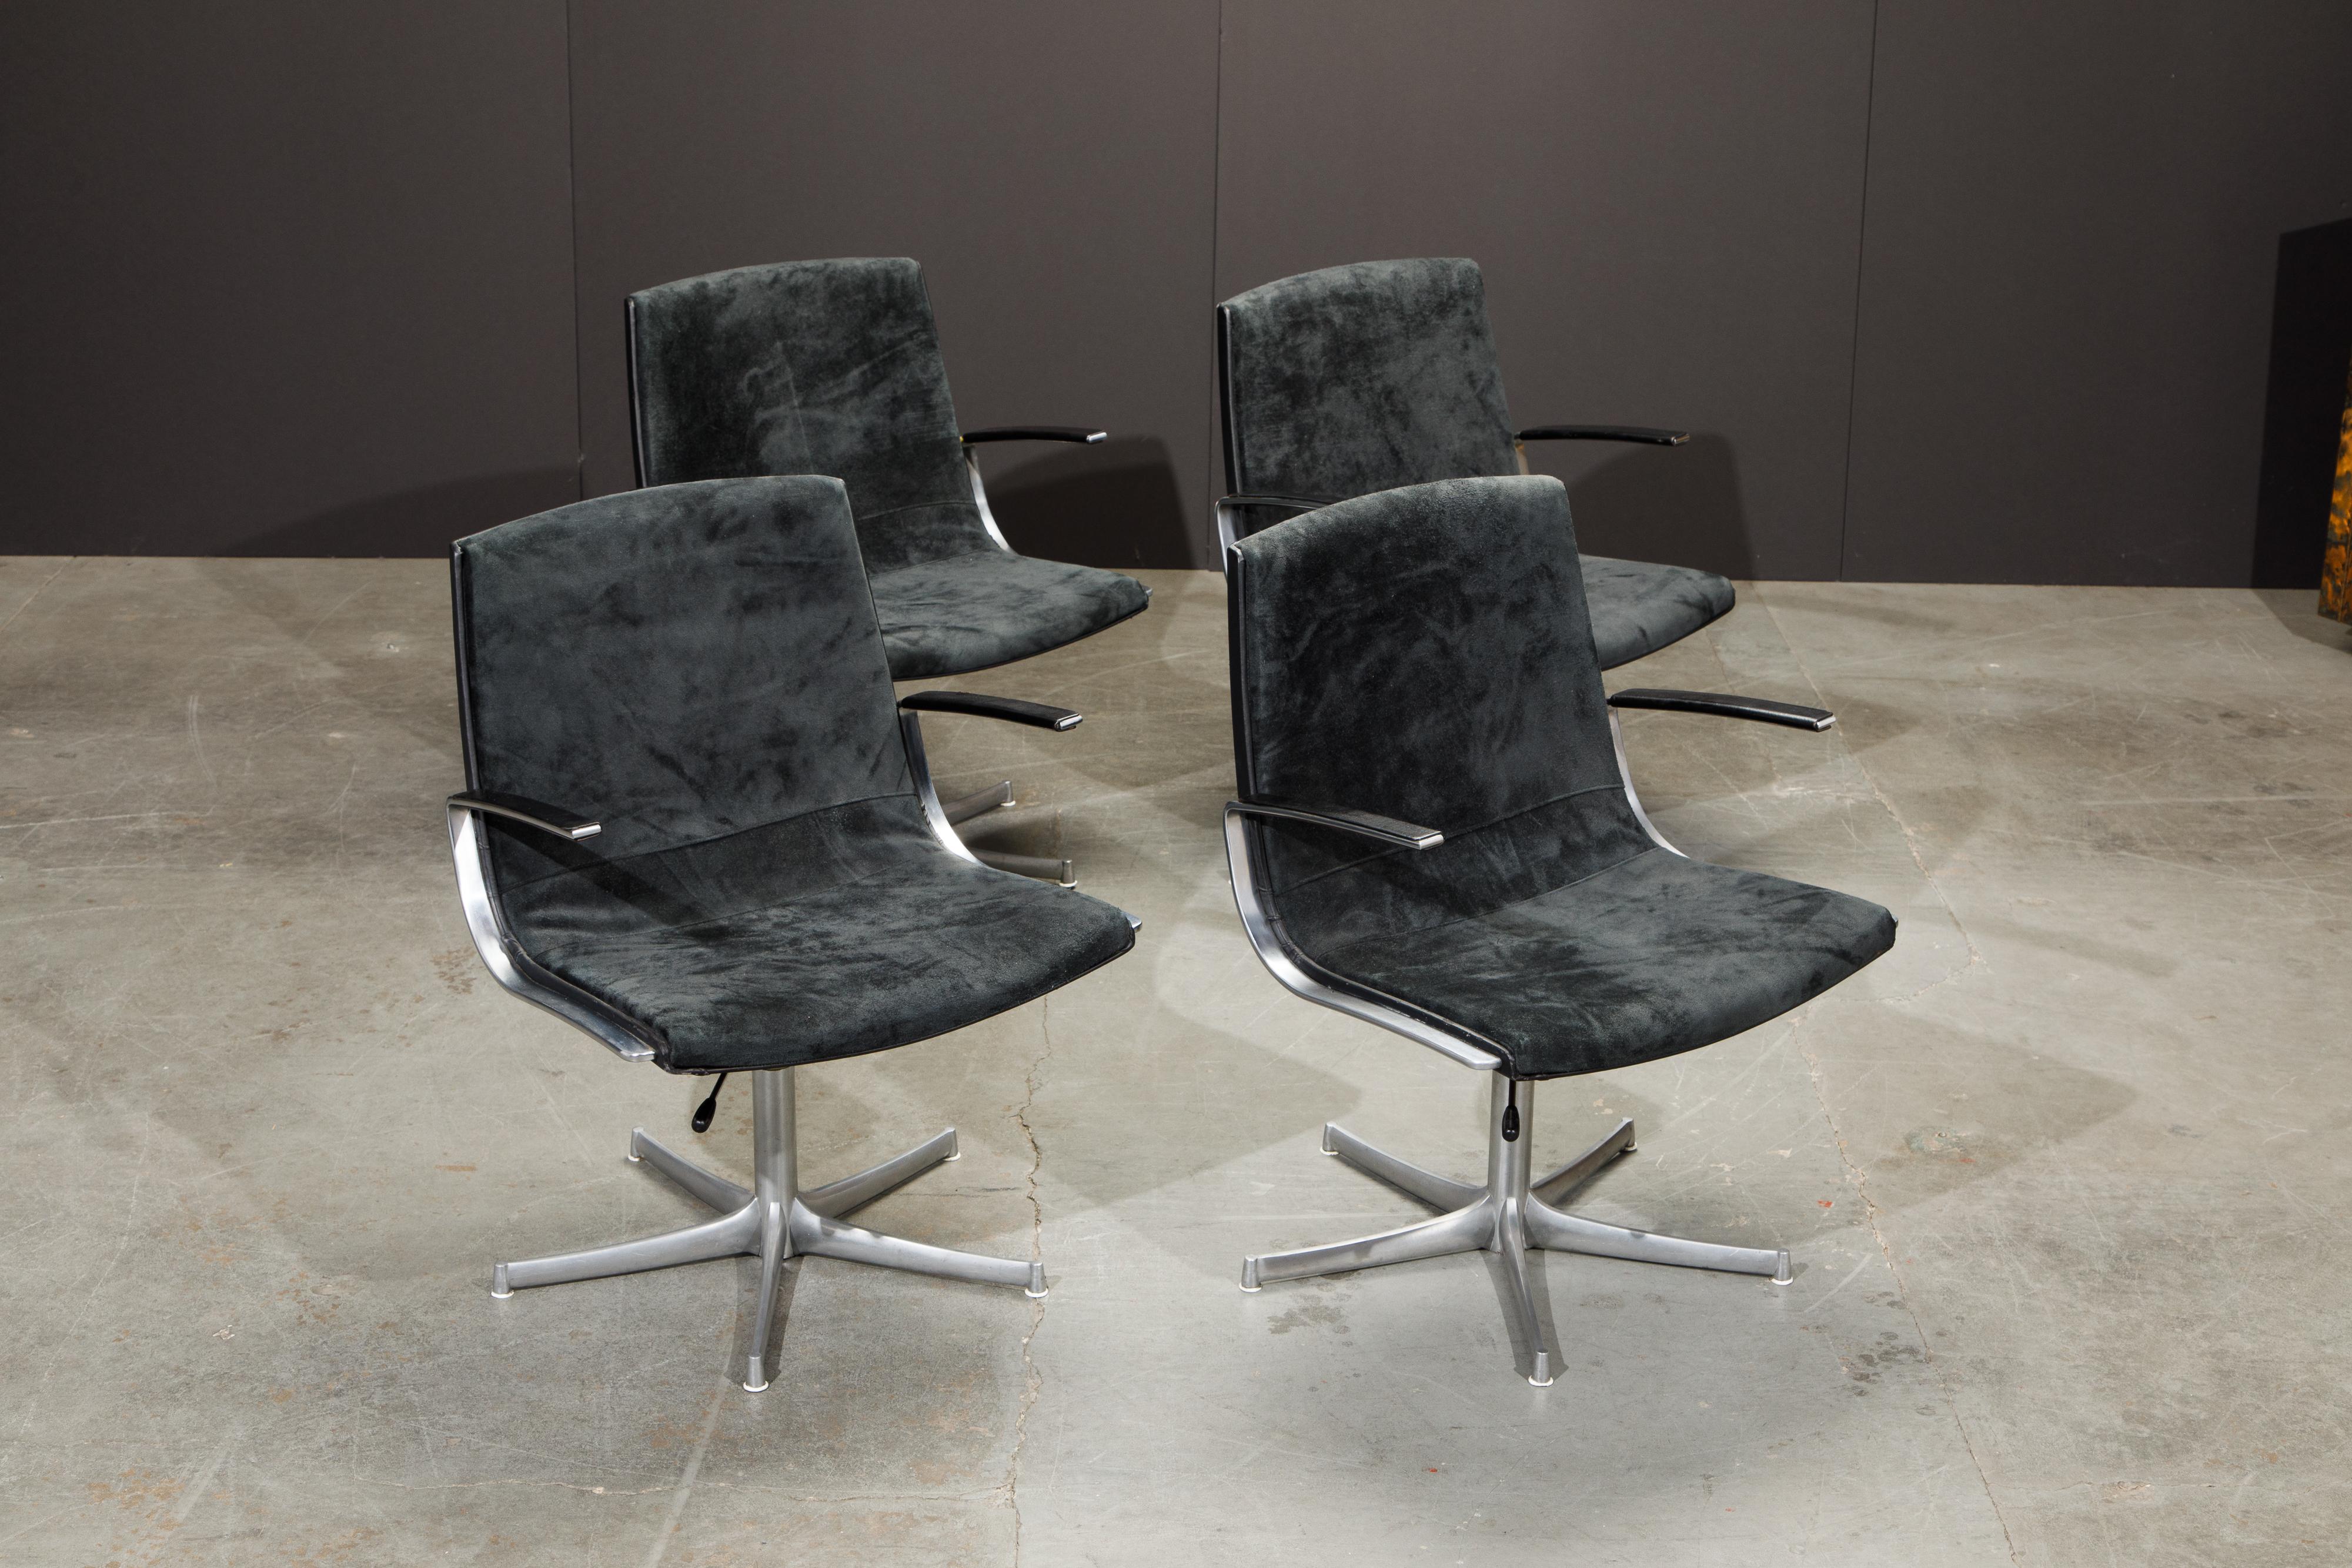 This incredible set of four swivel lounge chairs by Preben Fabricius and Jorgen Kastholm for Walter Knoll (Germany) featuring soft luxurious charcoal black suede leather seats and contrasting black leather arms, back and trim with matte chromed